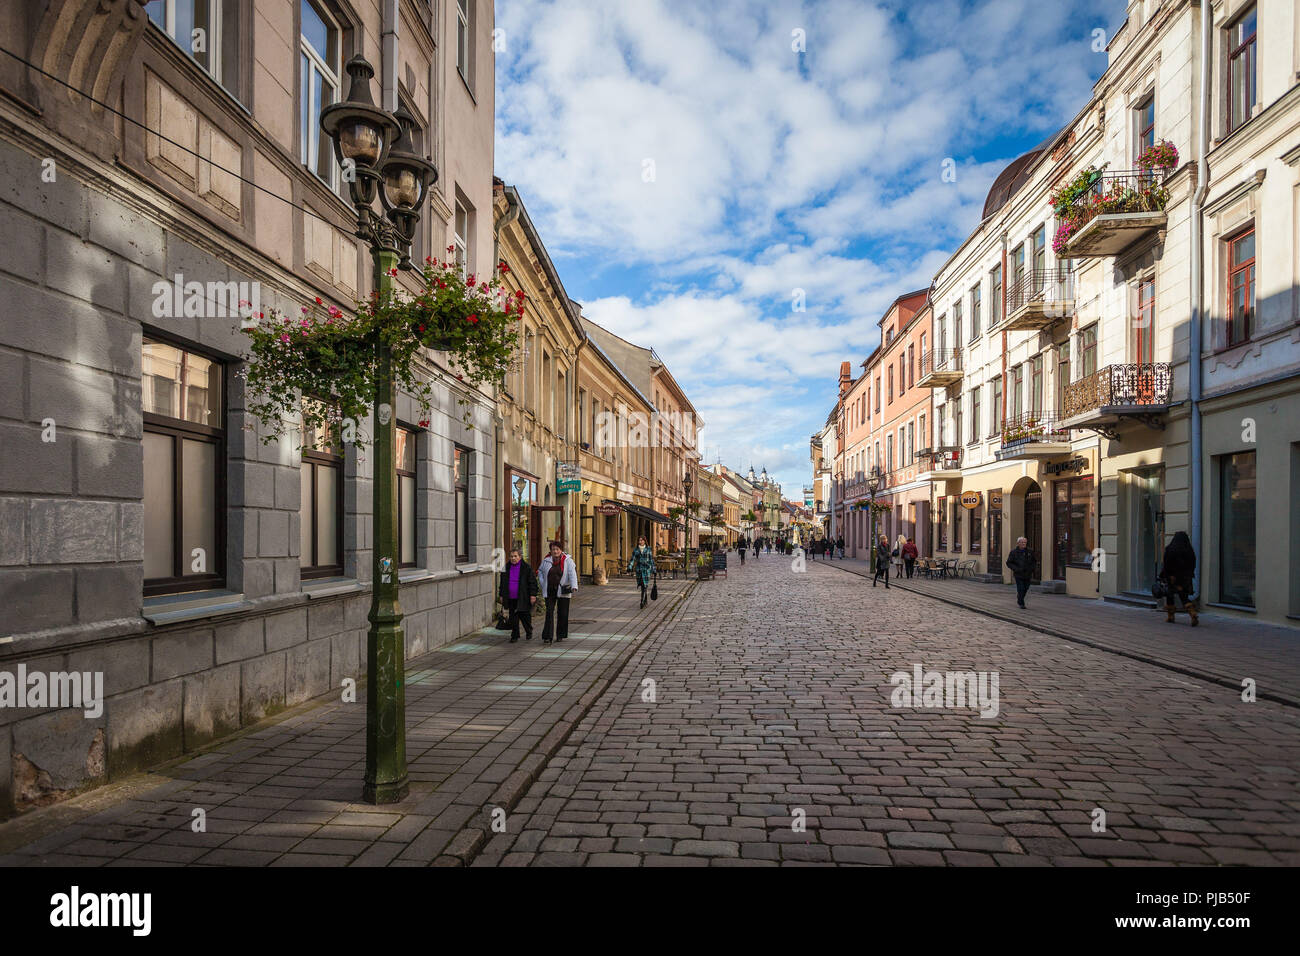 KAUNAS / LITHUANIA - OCTOBER 11, 2016: View of Vilniaus street, main street in the Old town Stock Photo